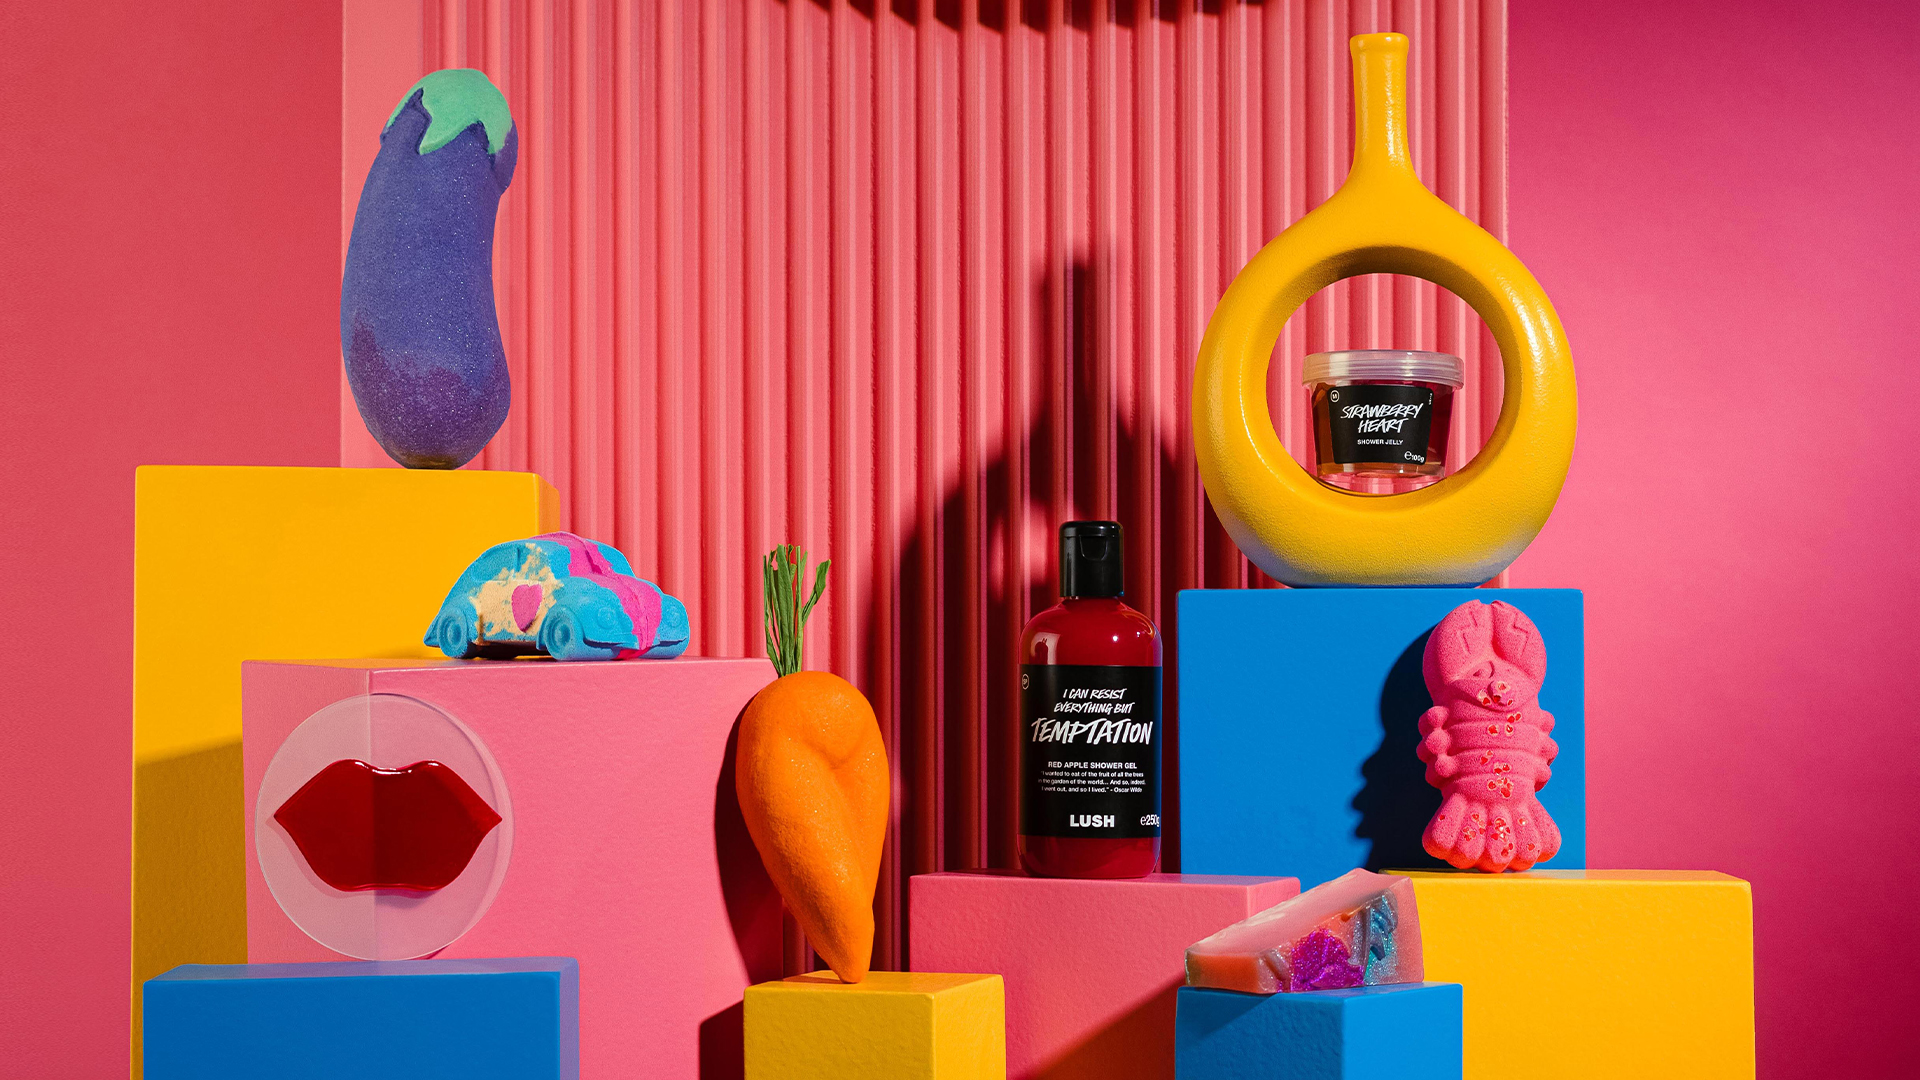 Lush launches new products ahead of Valentines Day TheIndustry.beauty